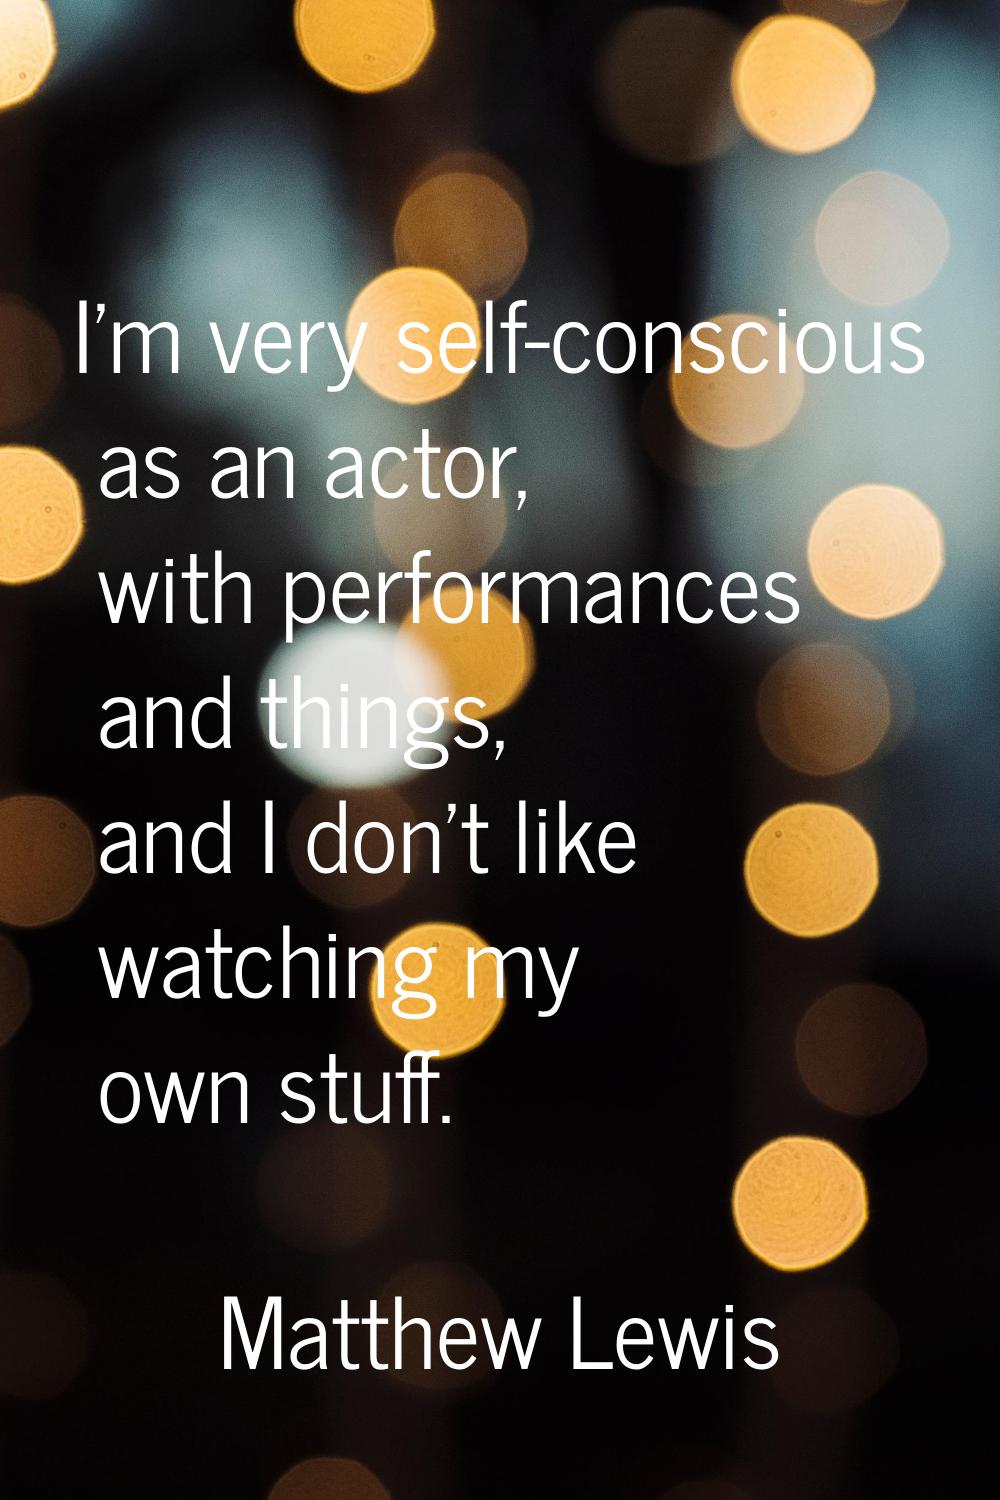 I'm very self-conscious as an actor, with performances and things, and I don't like watching my own